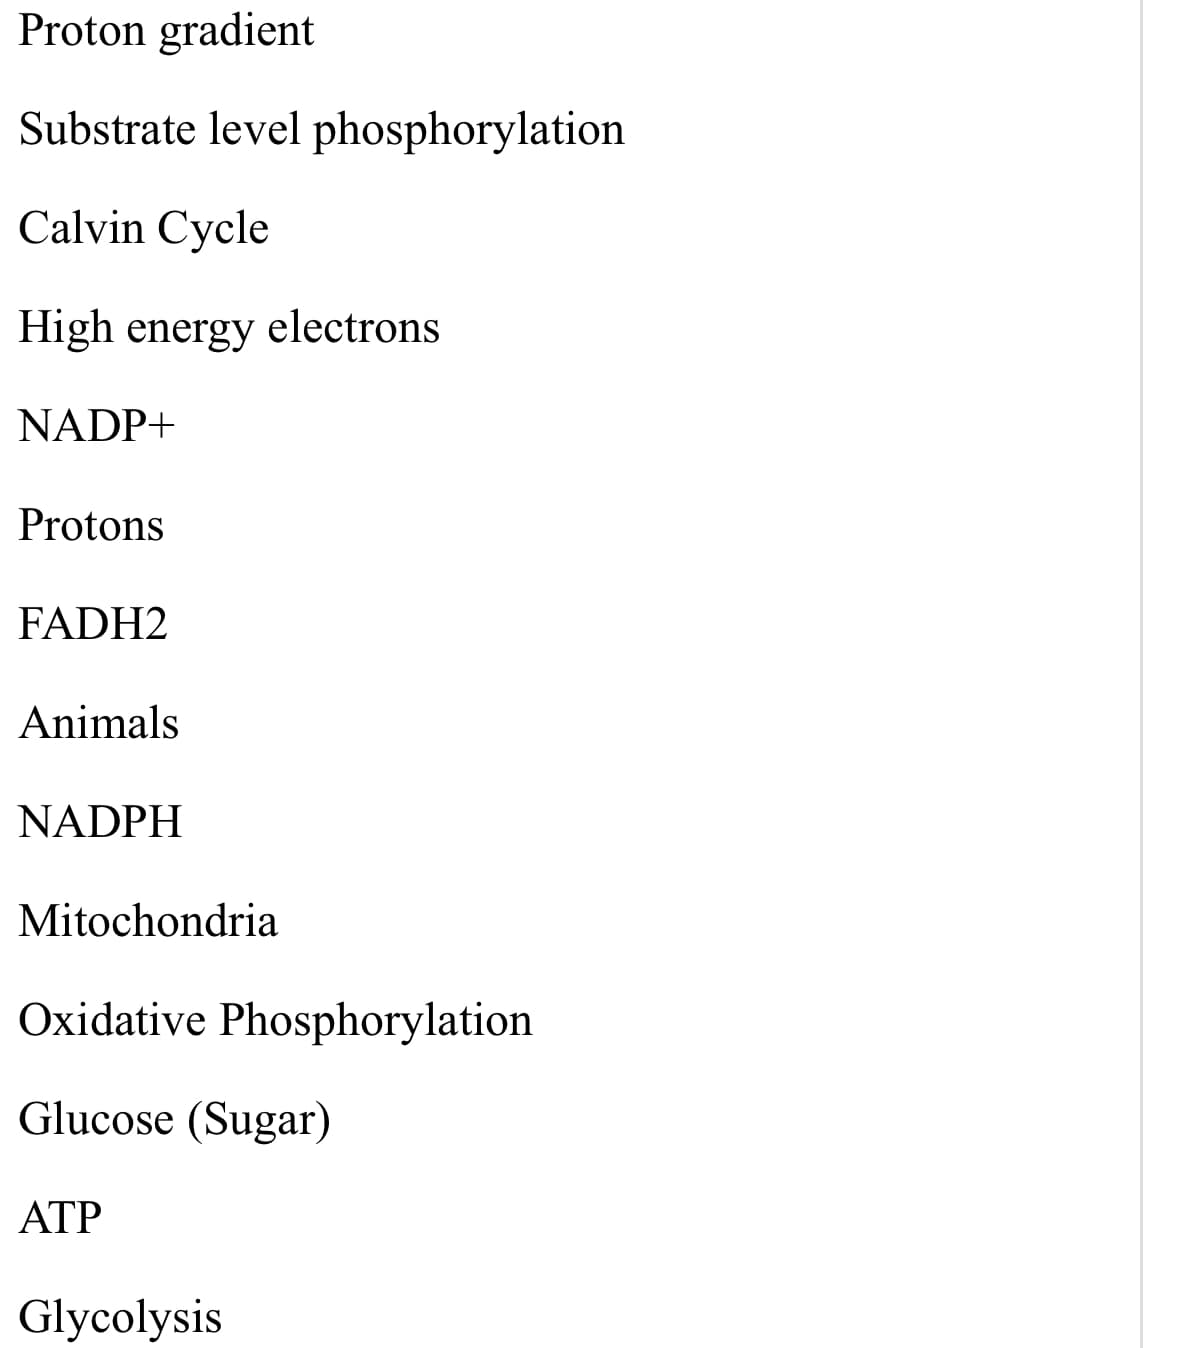 Proton gradient
Substrate level phosphorylation
Calvin Cycle
High energy electrons
NADP+
Protons
FADH2
Animals
NADPH
Mitochondria
Oxidative Phosphorylation
Glucose (Sugar)
ATP
Glycolysis